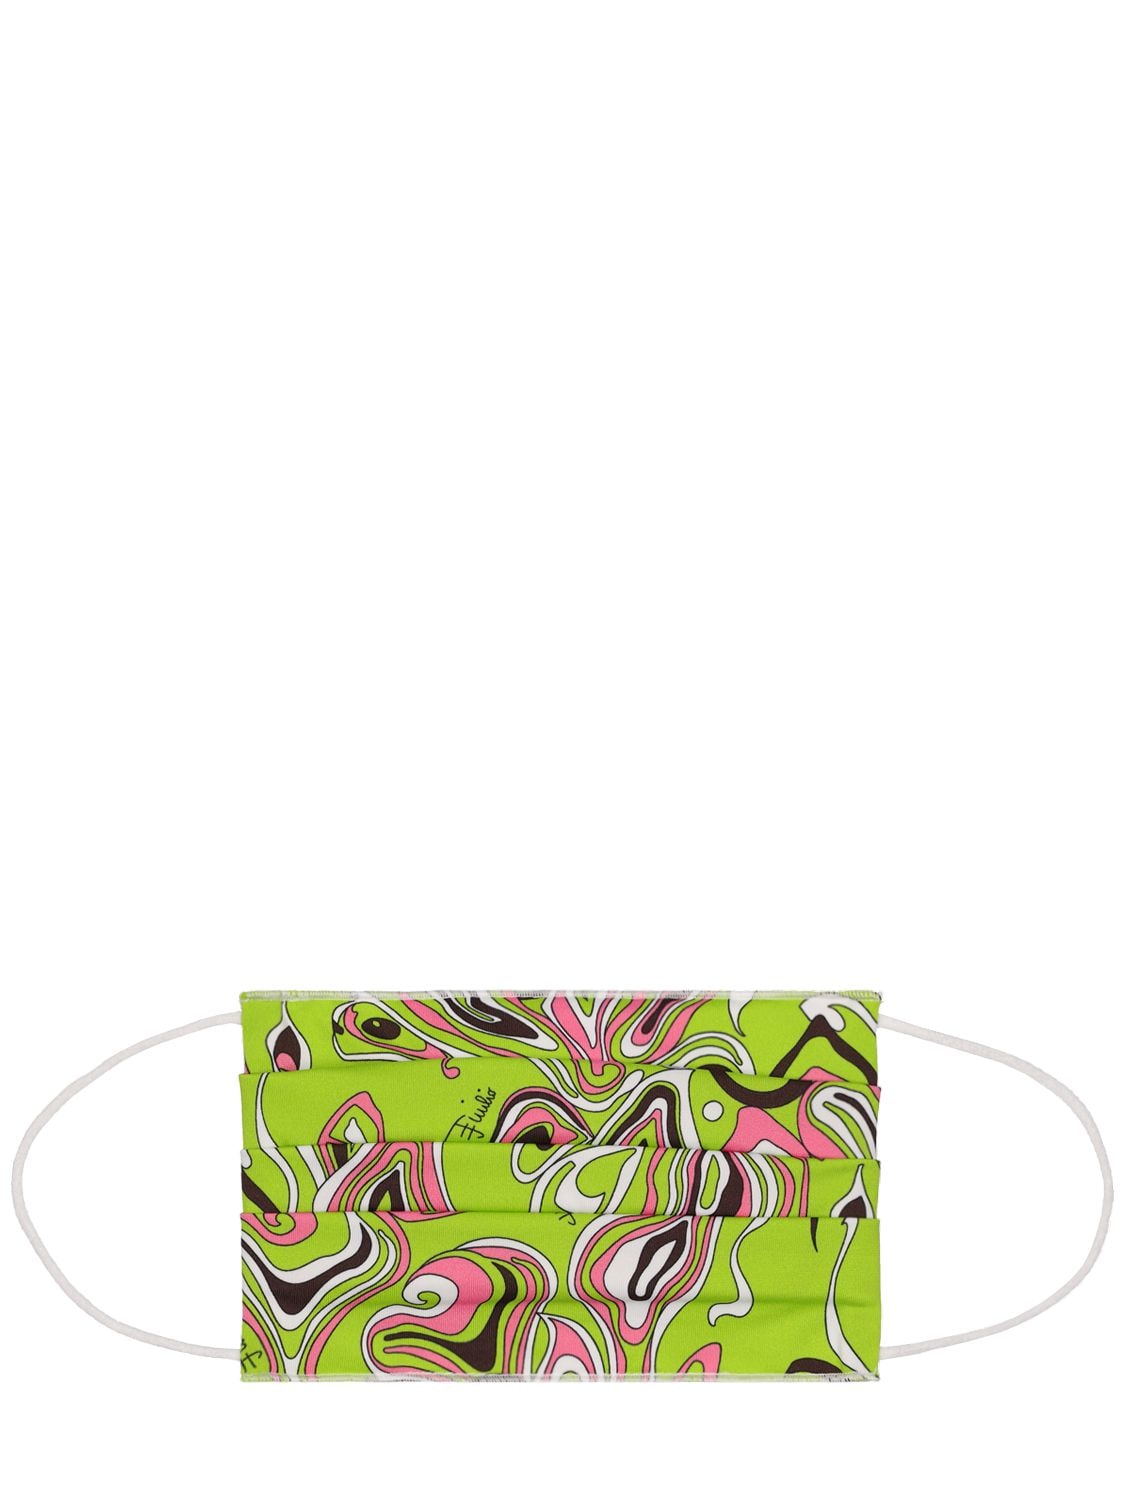 Emilio Pucci Printed Tech Travel Mask In Green